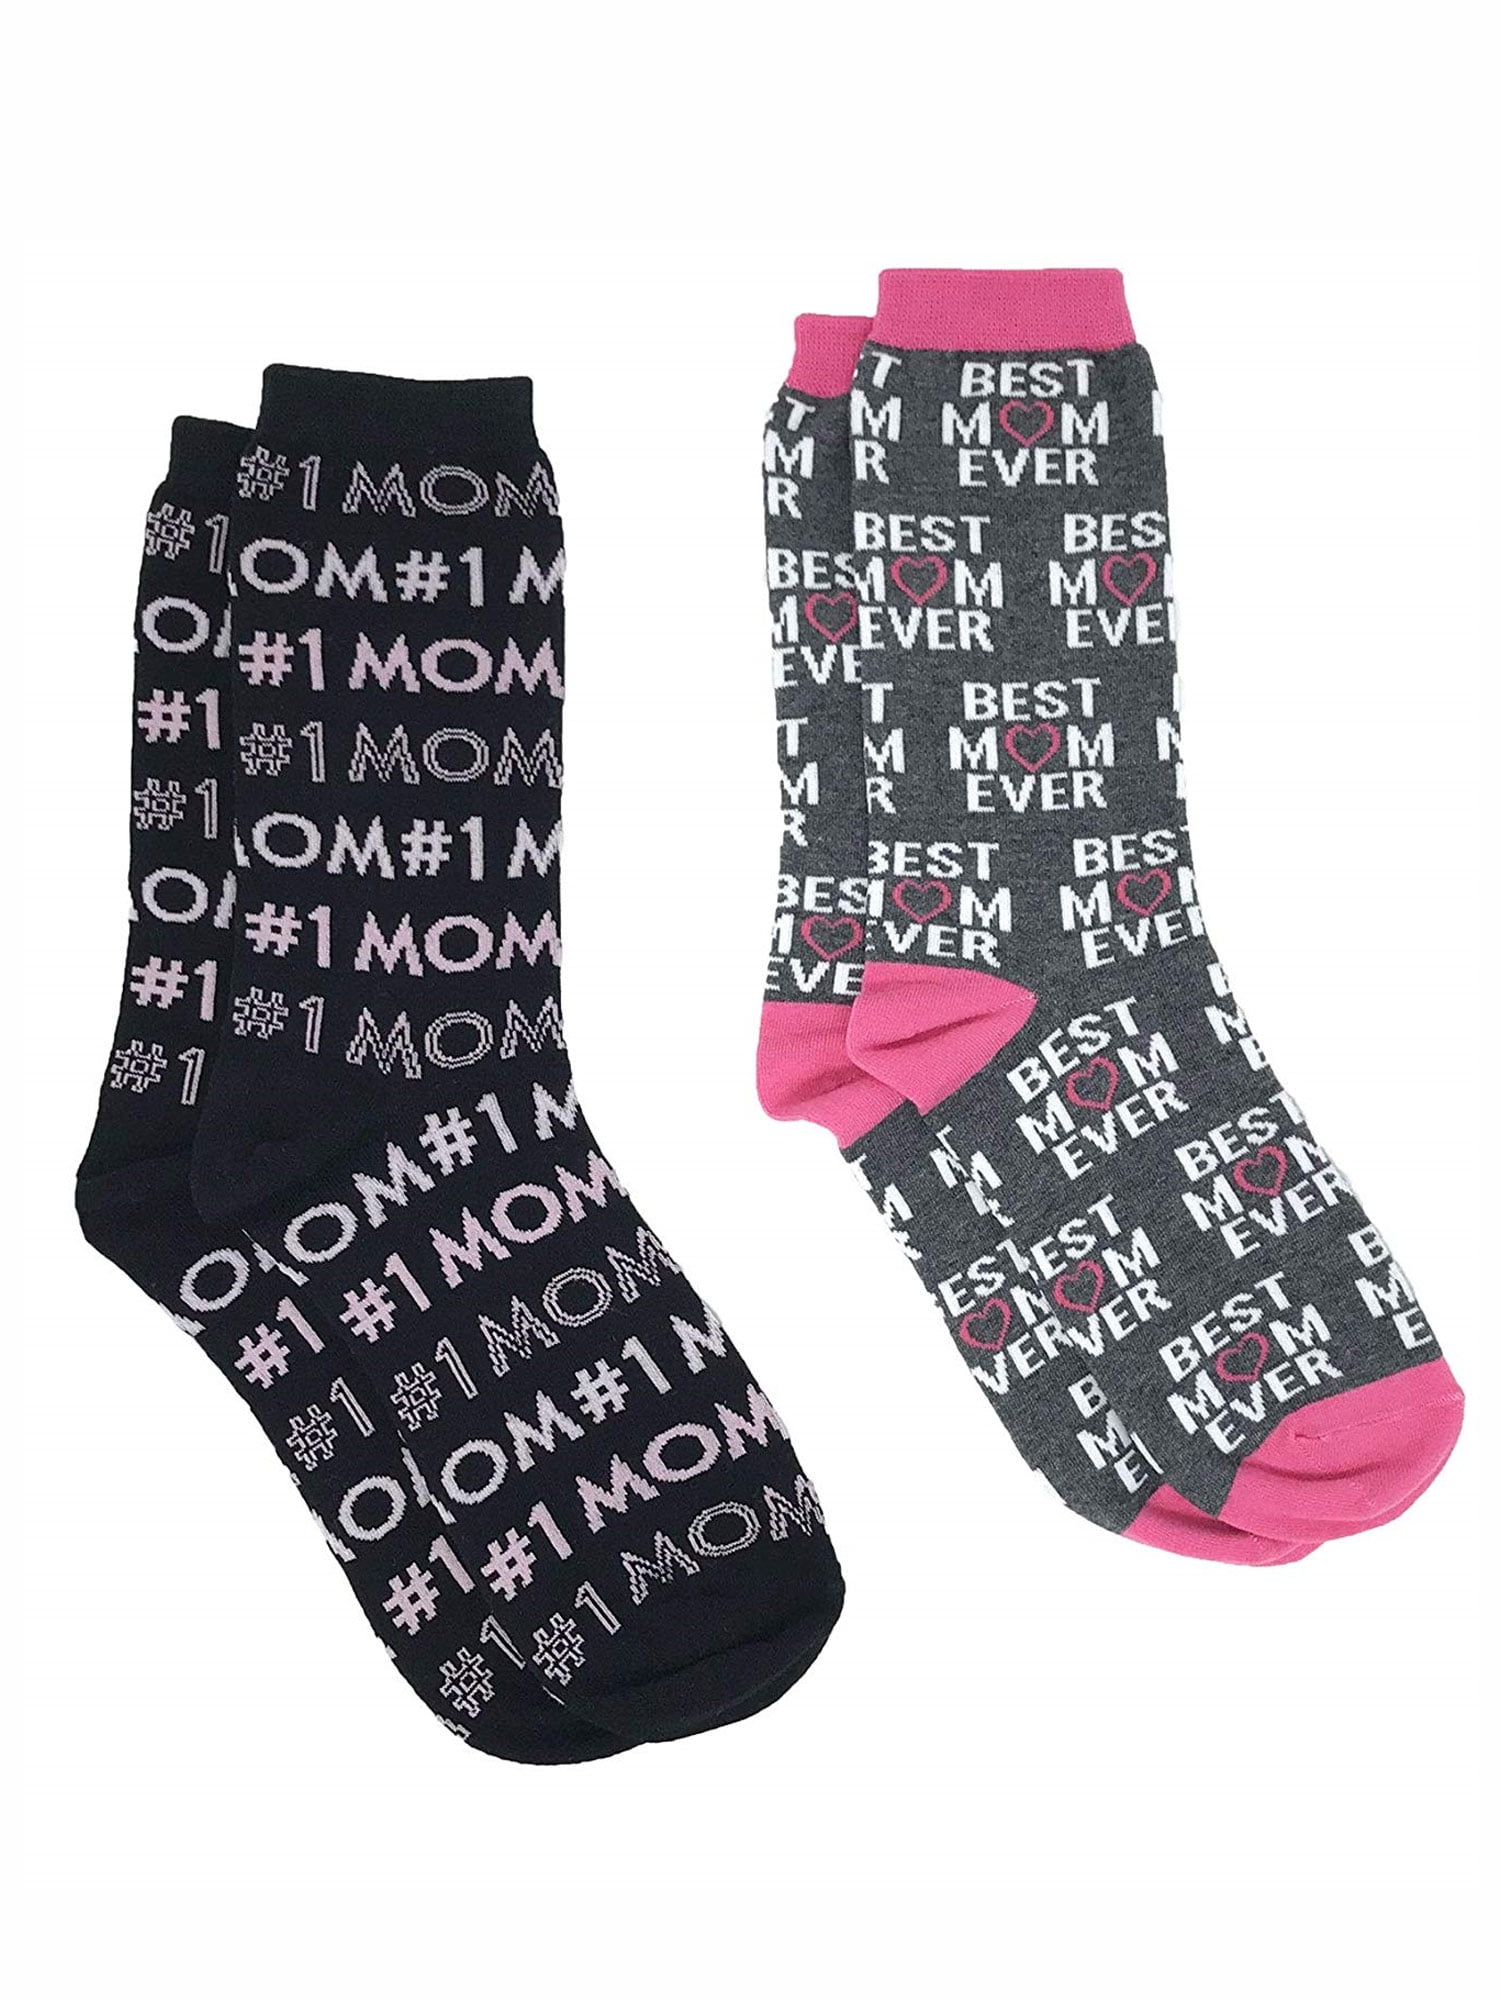 Women High Ankle Cotton Crew Socks Best Mom Ever Casual Sport Stocking